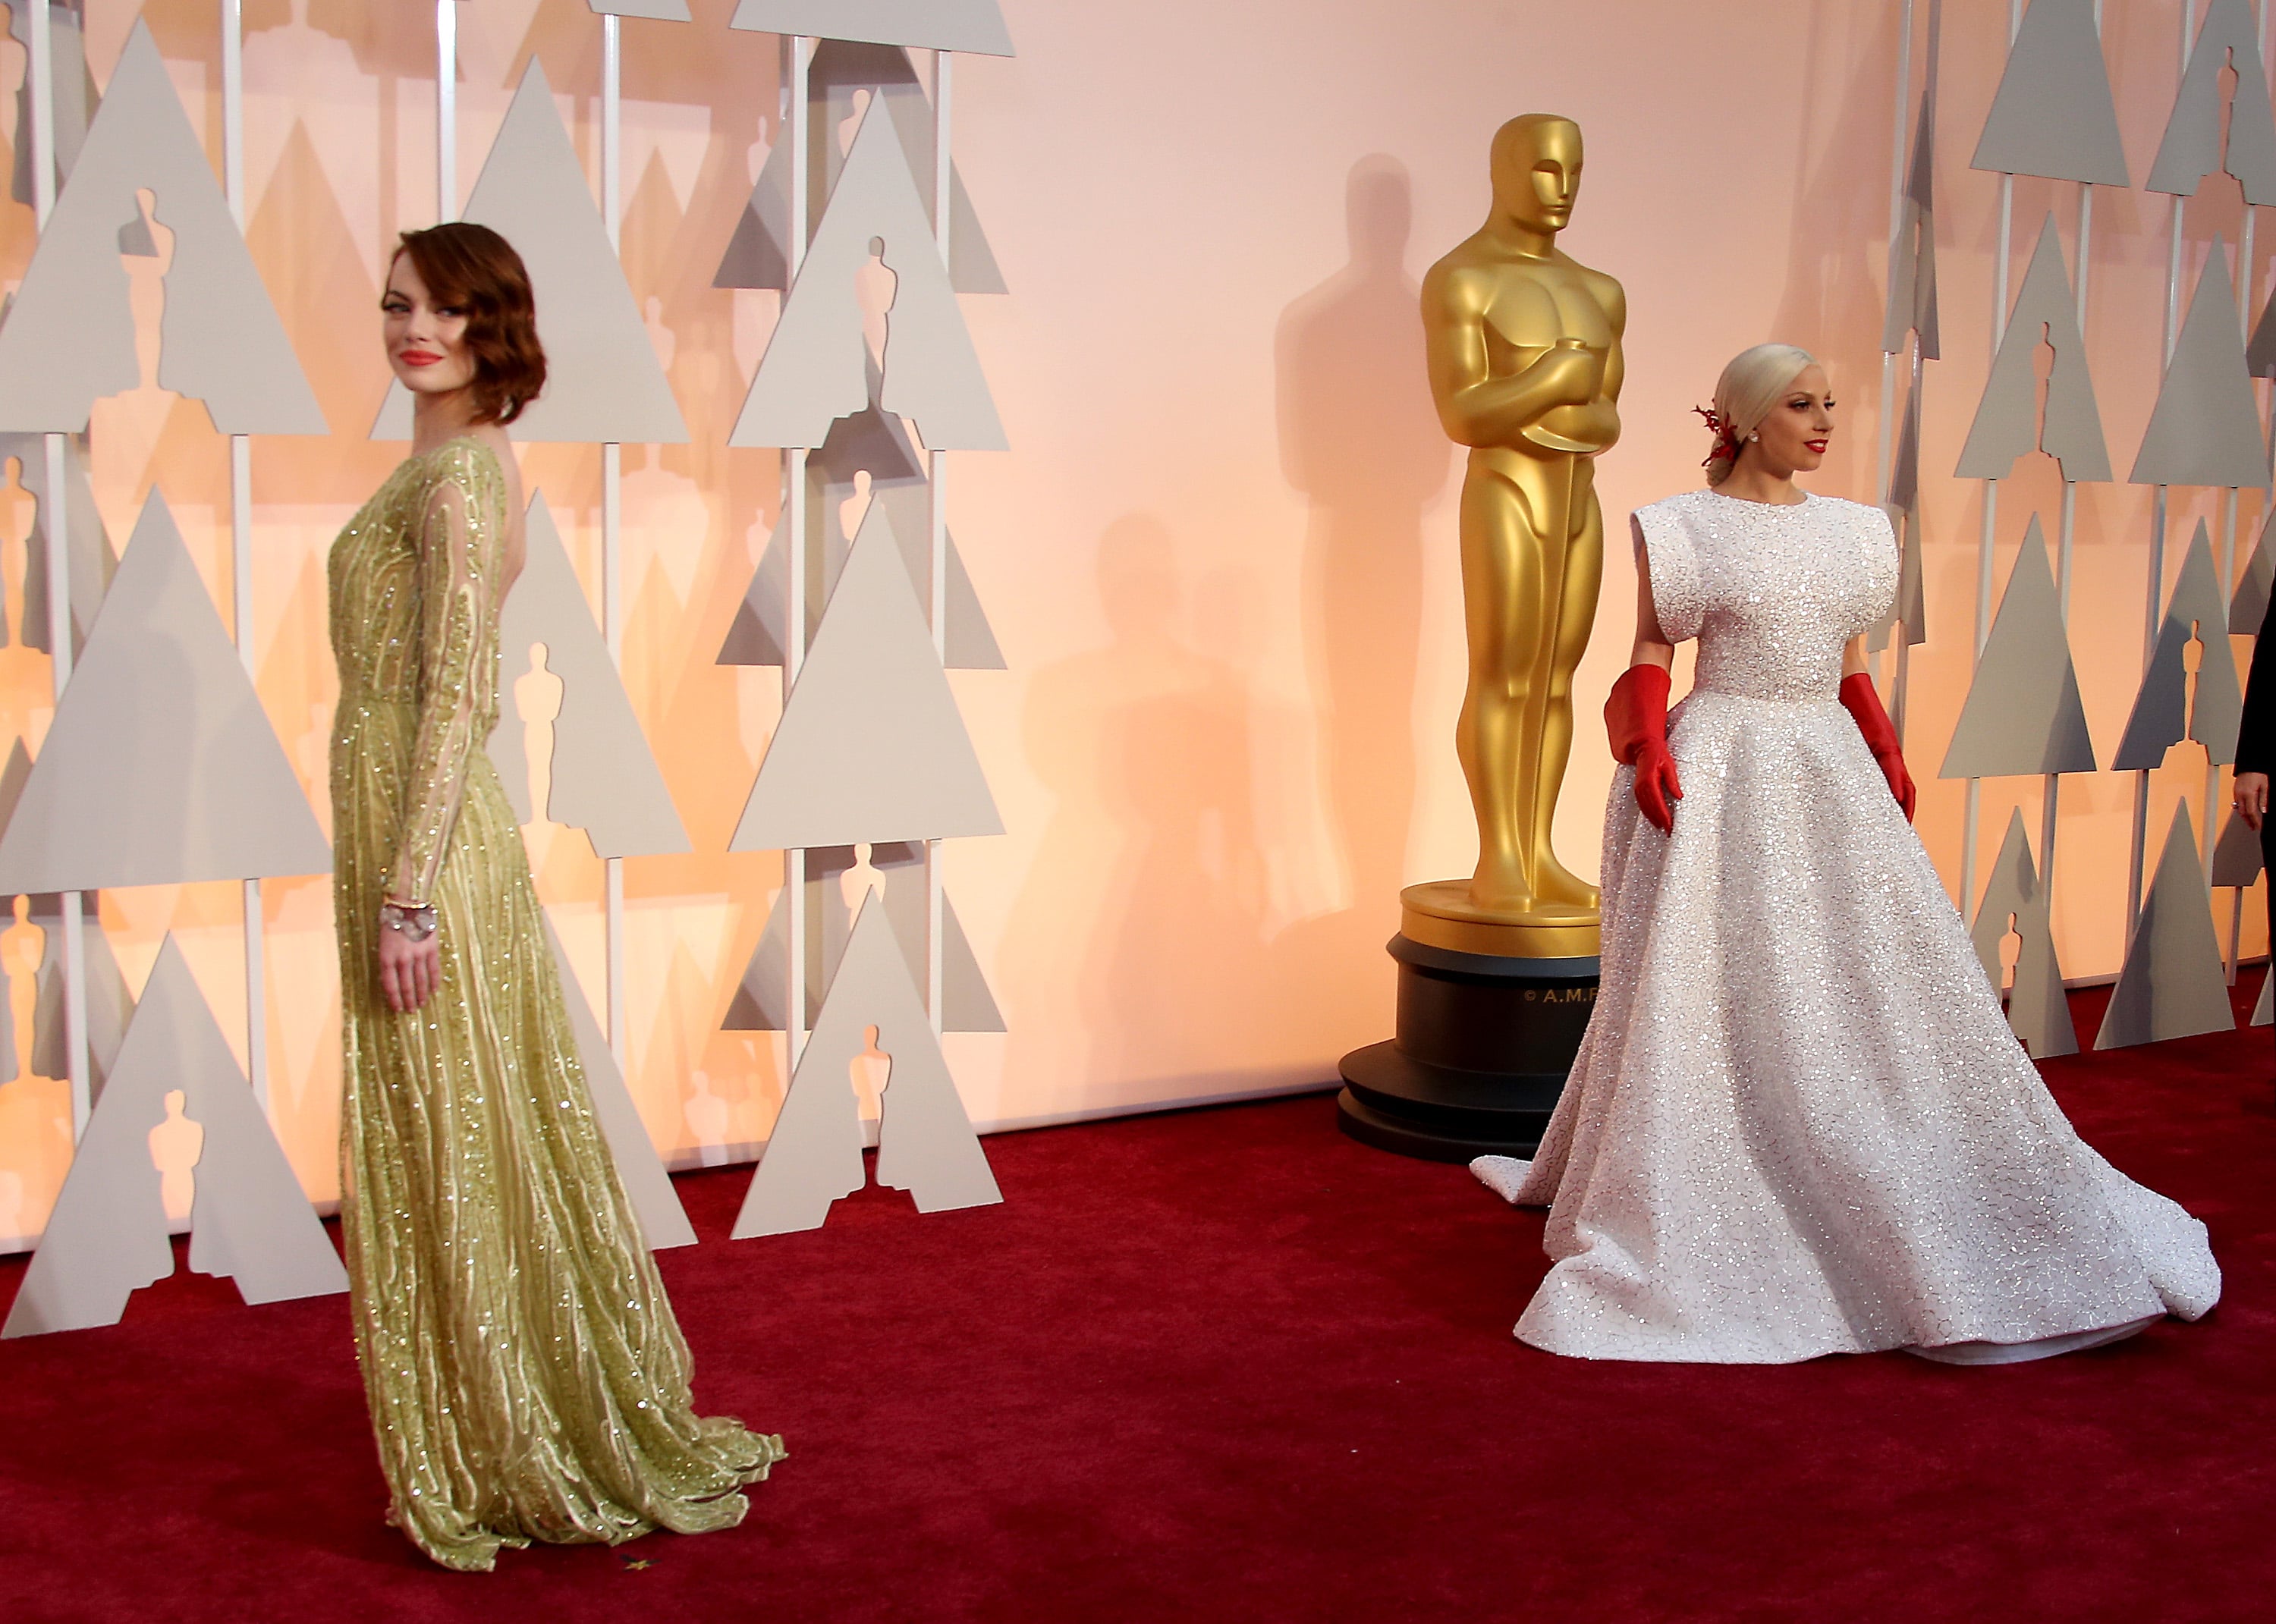 Zoe Saldaña leads the efforts for a sustainable Oscars red carpet